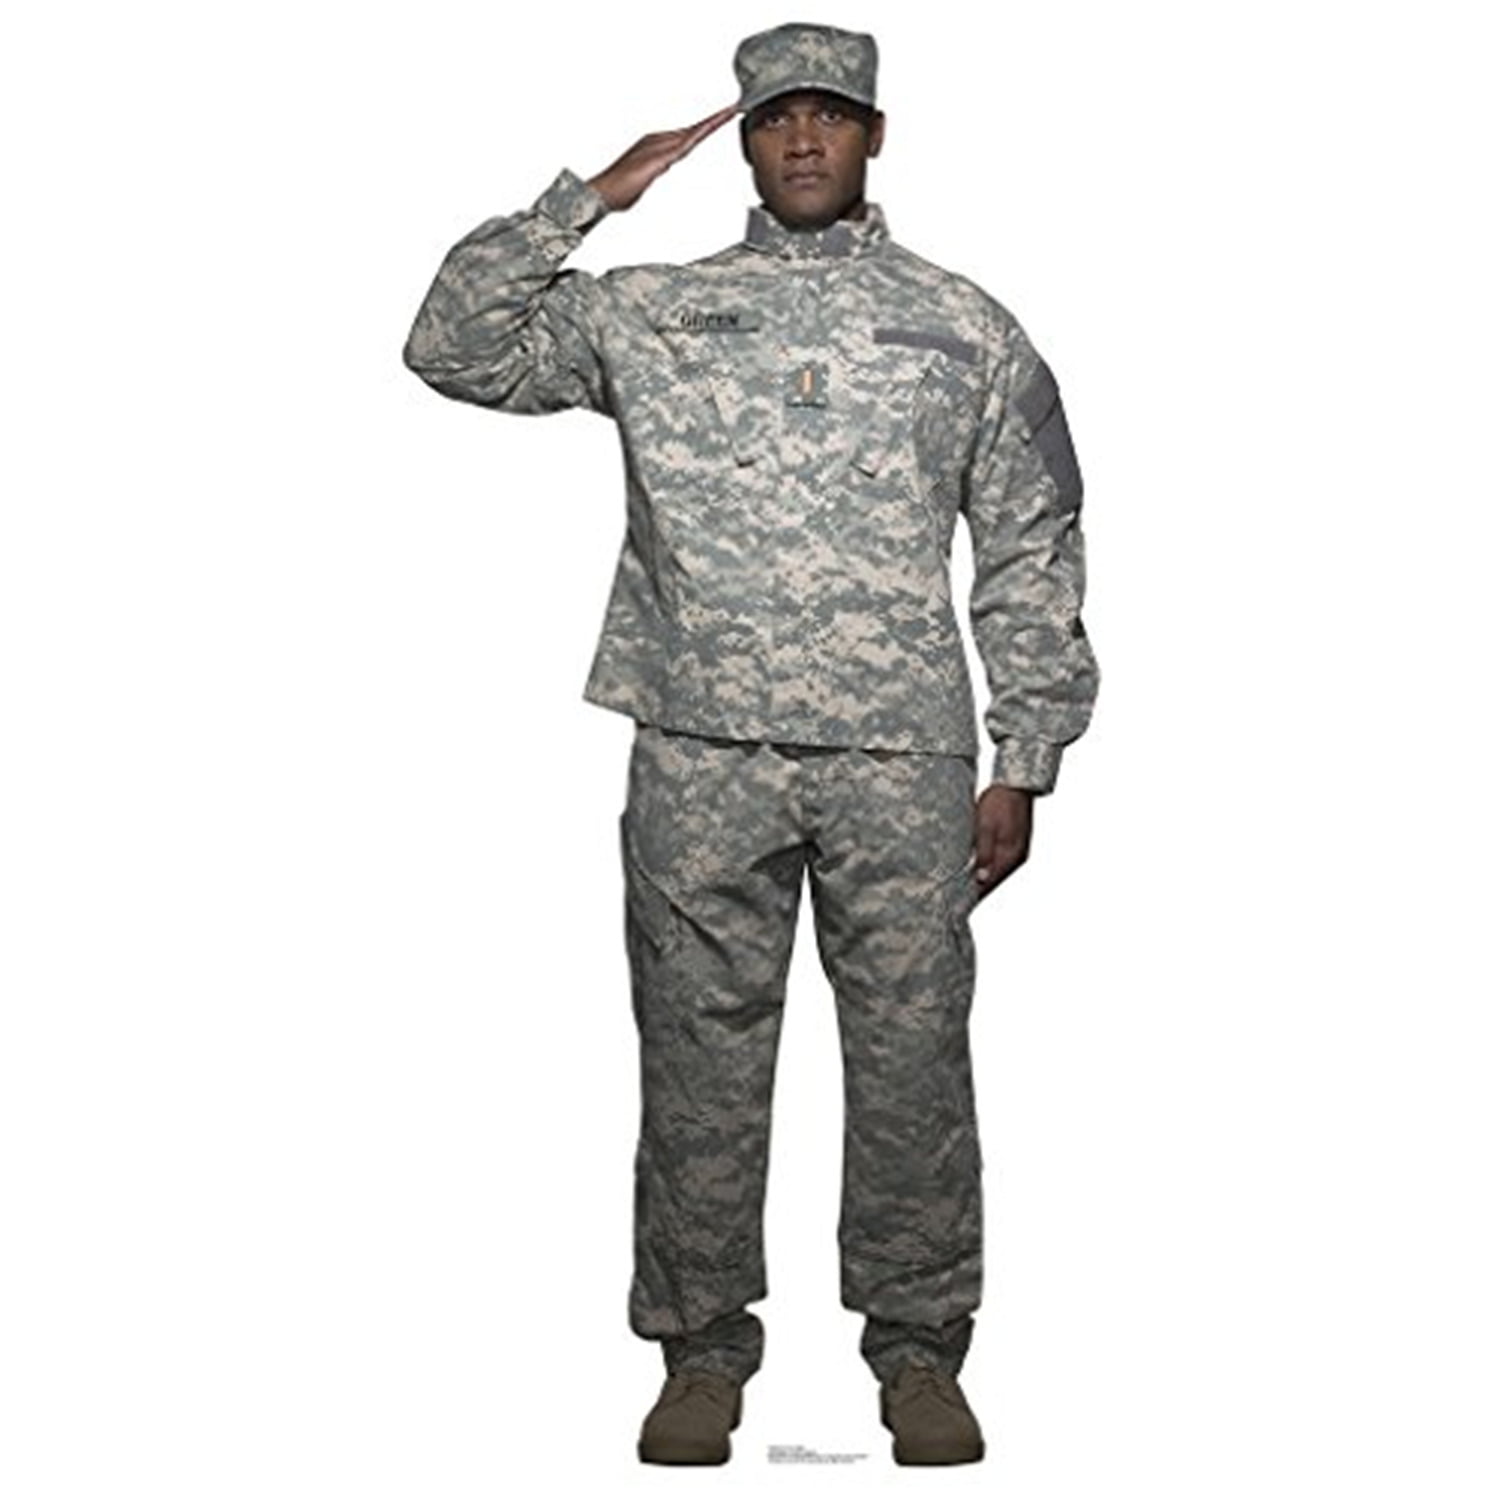 Picture of Advanced Graphics 1996 76 x 36 in. Digital Camo Soldier Cardboard Standup